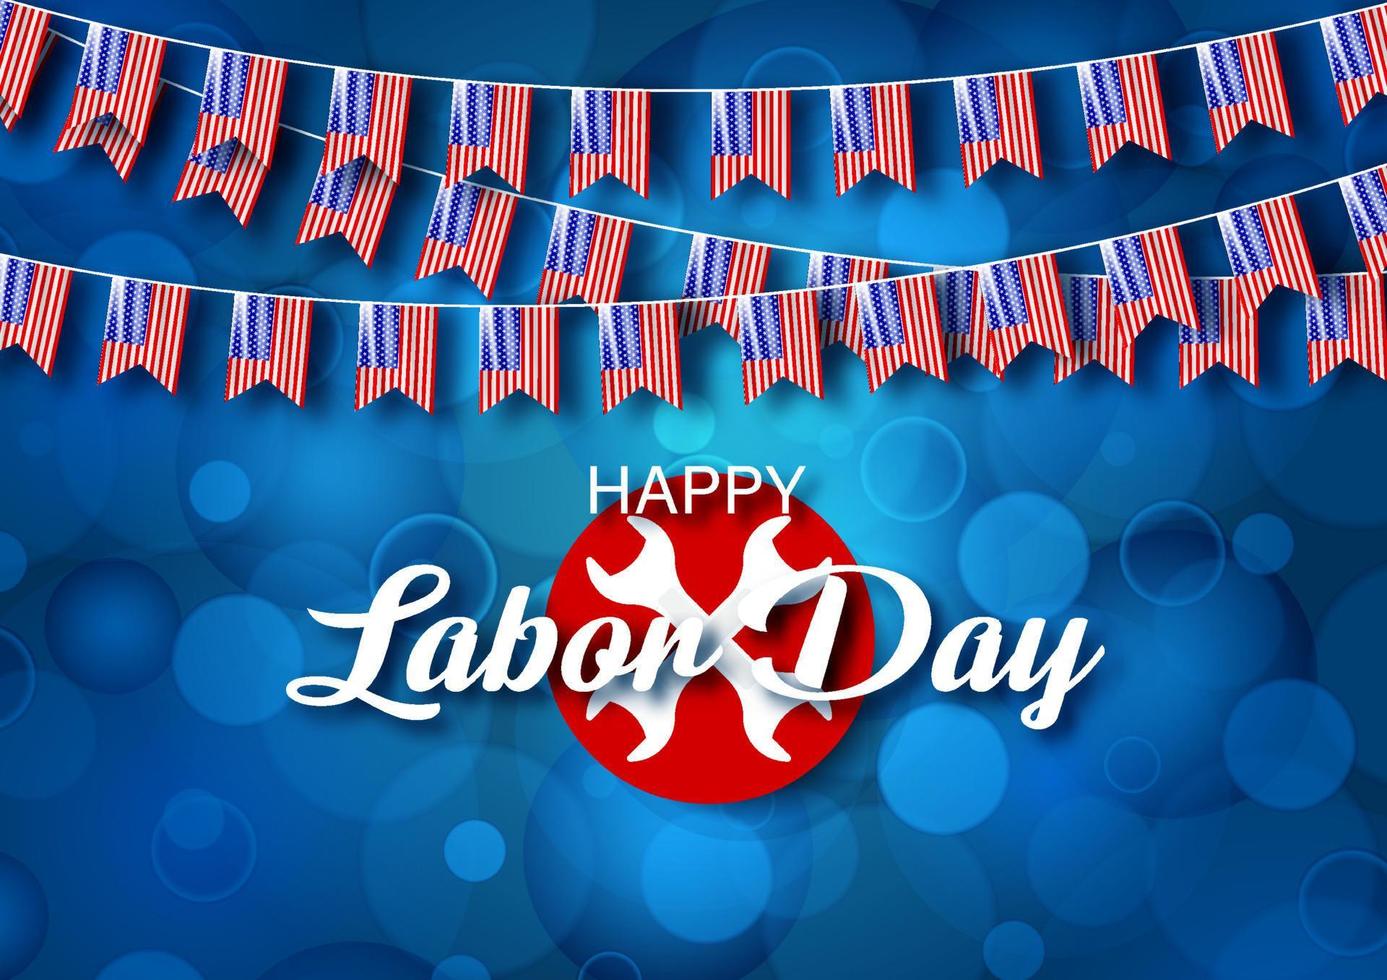 Happy Labor Day lettering on symbol of industry tools with the small U.S.A flag hang on blue blurred and bokeh background. Card and poster of the U.S Labor Day in vector design.